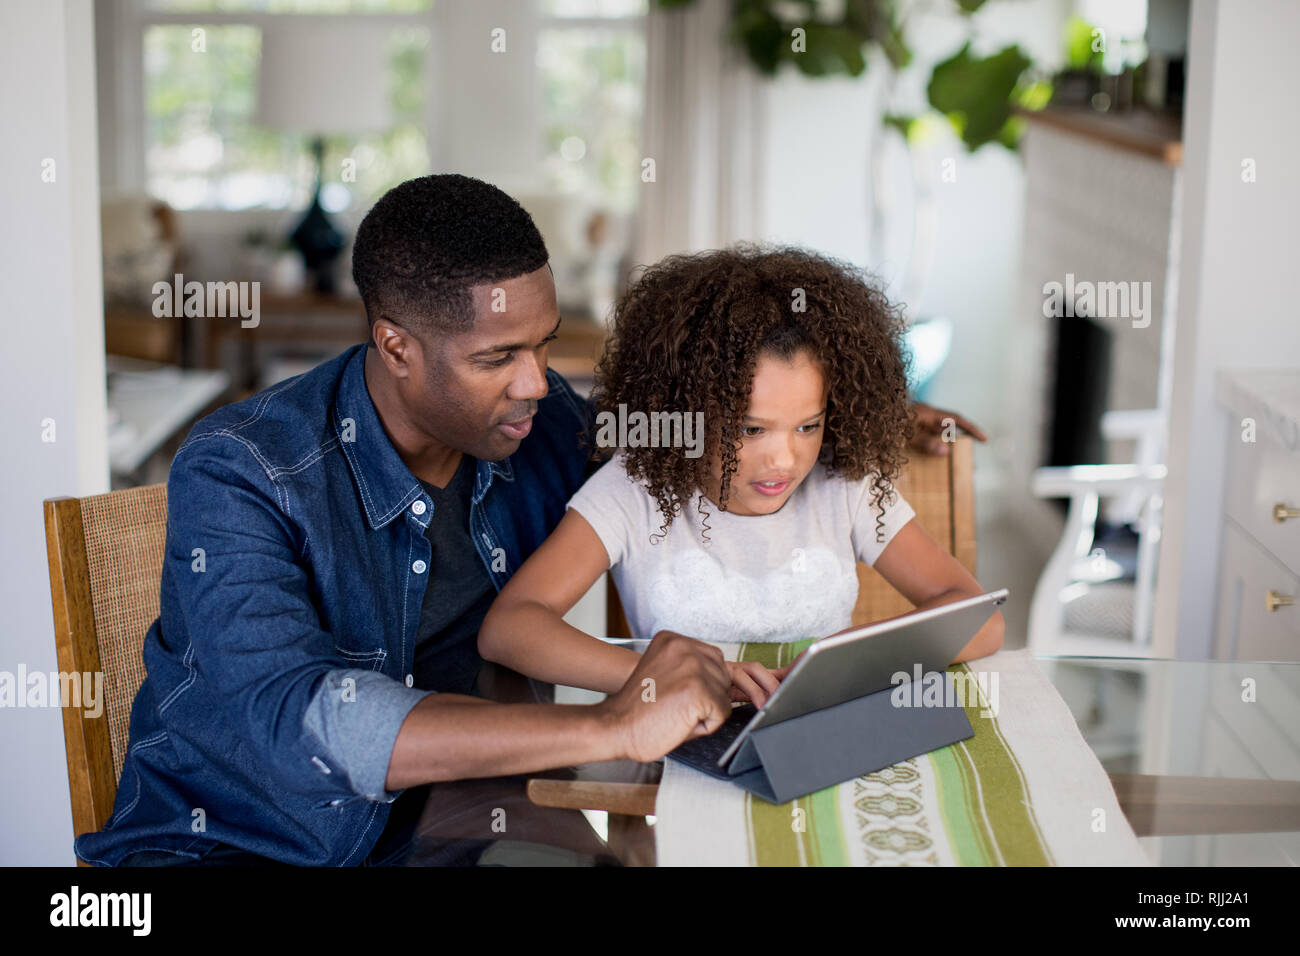 African American father helping daughter with homework using digital tablet Stock Photo